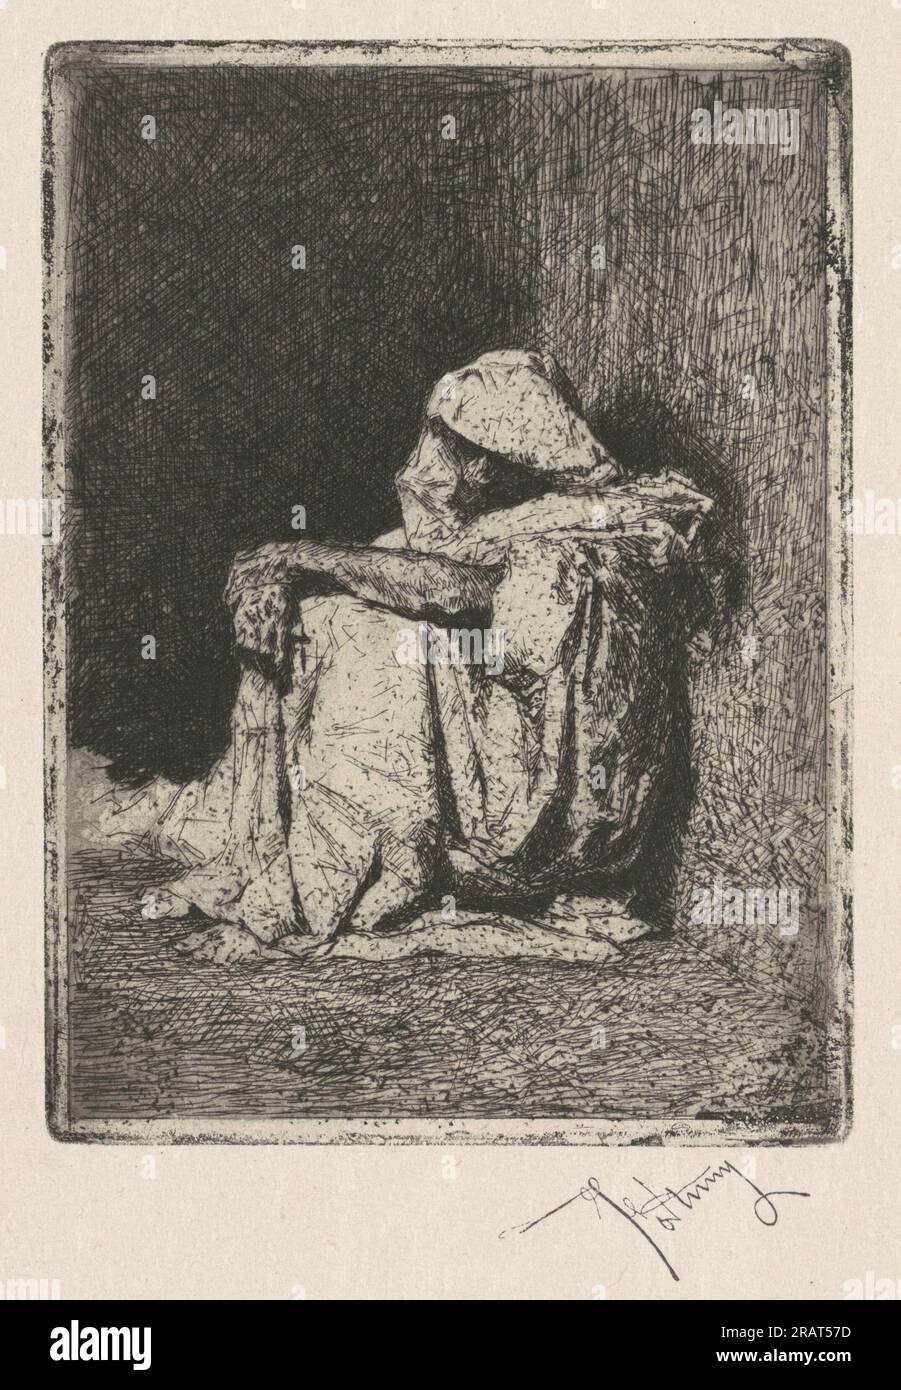 'Mariano Fortuny y Carbó, Arabe assis (Seated Arab), 1873, etching and aquatint on japan paper, laid down, plate: 13.9 × 10.1 cm (5 1/2 × 4 in.) sheet: 32.1 × 23.7 cm (12 5/8 × 9 5/16 in.), Purchased as the Gift of Ann and Matthew Nimetz, 2016.104.1' Stock Photo